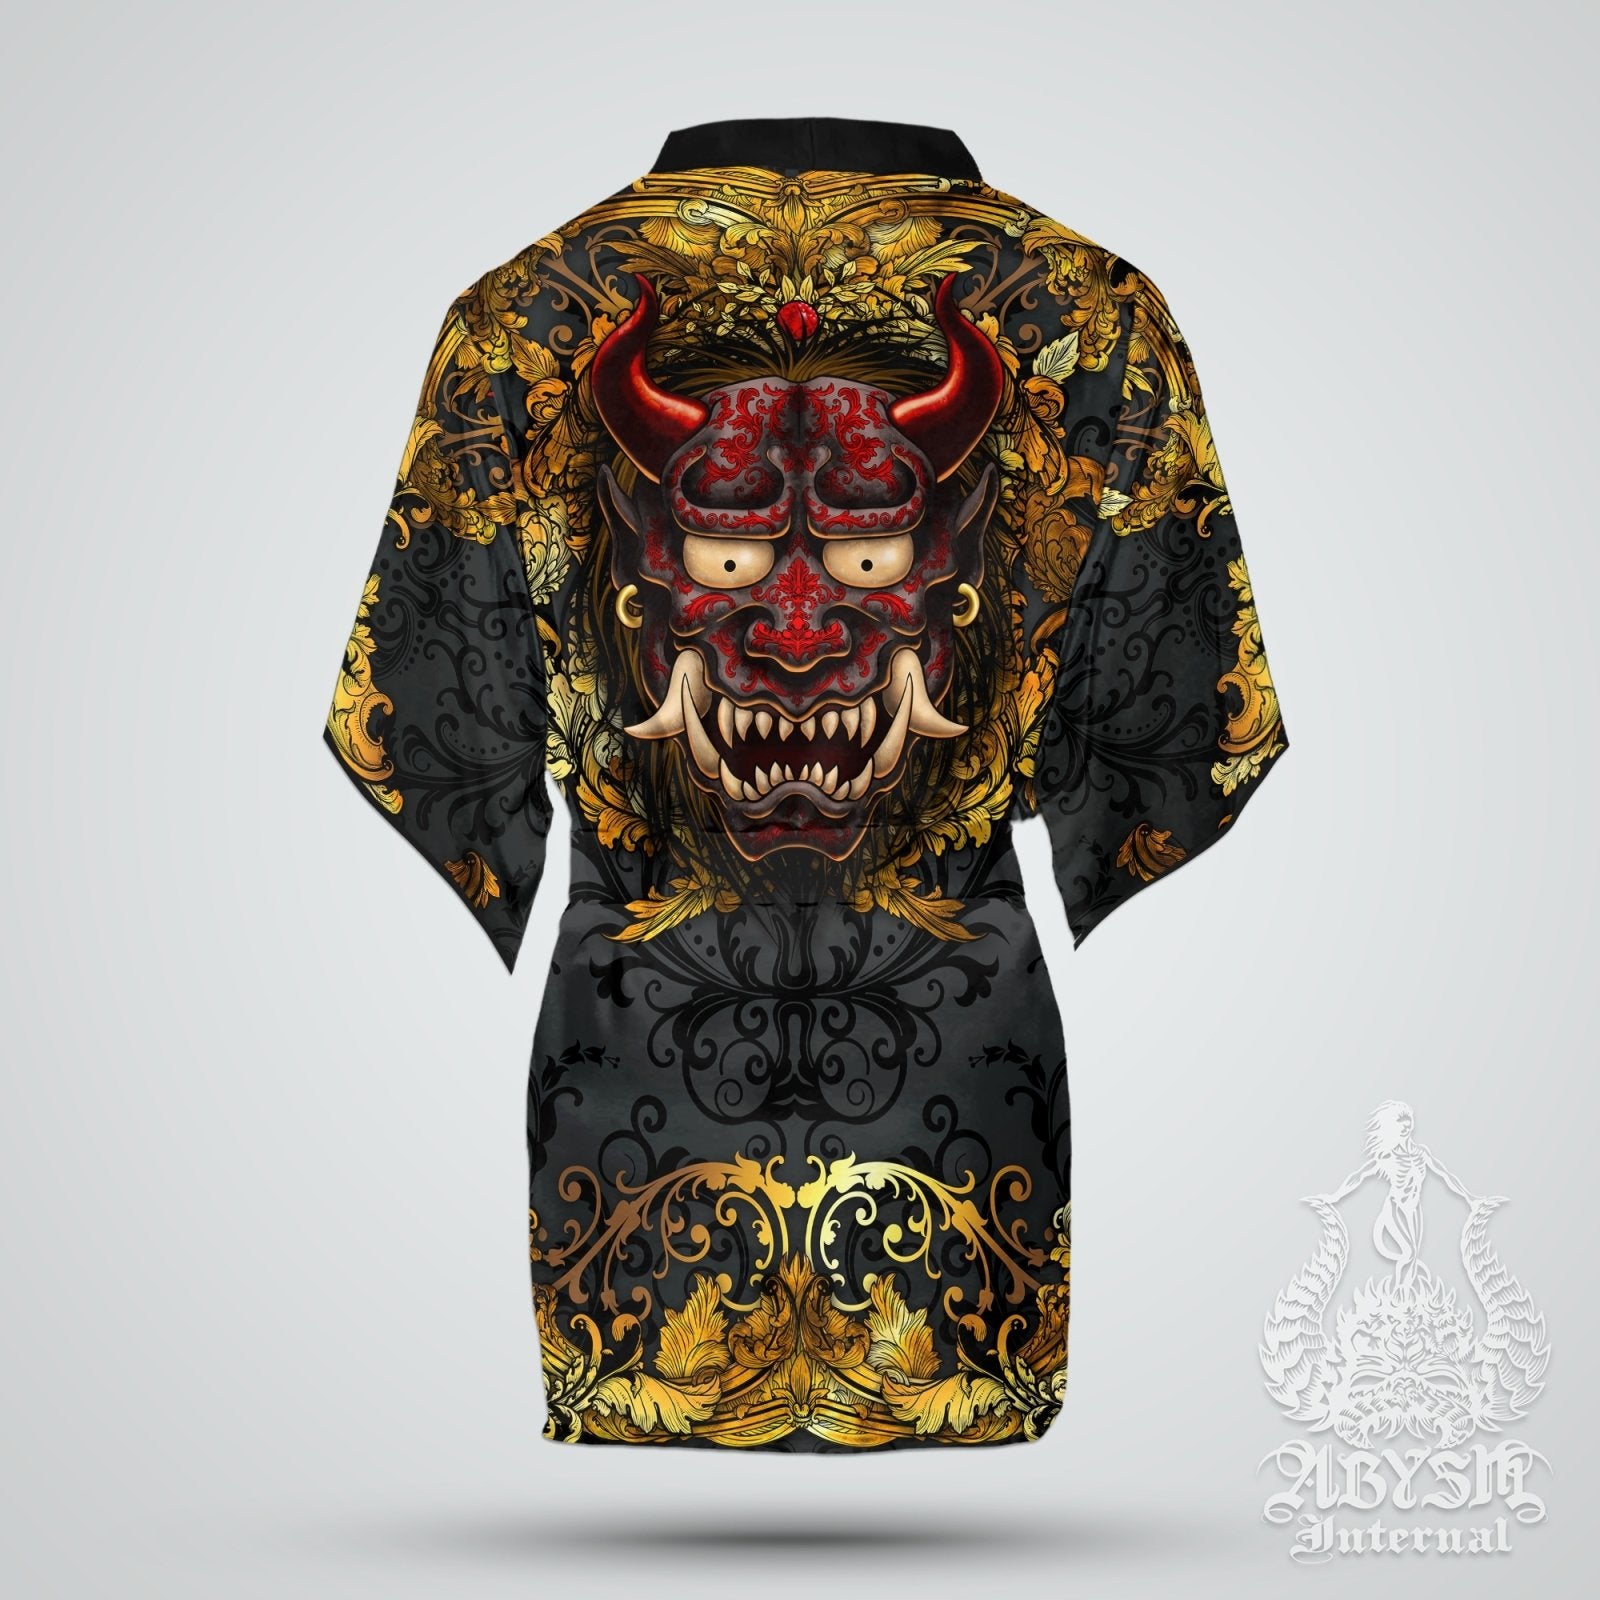 Demon Cover Up, Beach Outfit, Oni Party Kimono, Japanese Summer Festival Robe, Indie and Alternative Clothing, Unisex - Gold Black - Abysm Internal